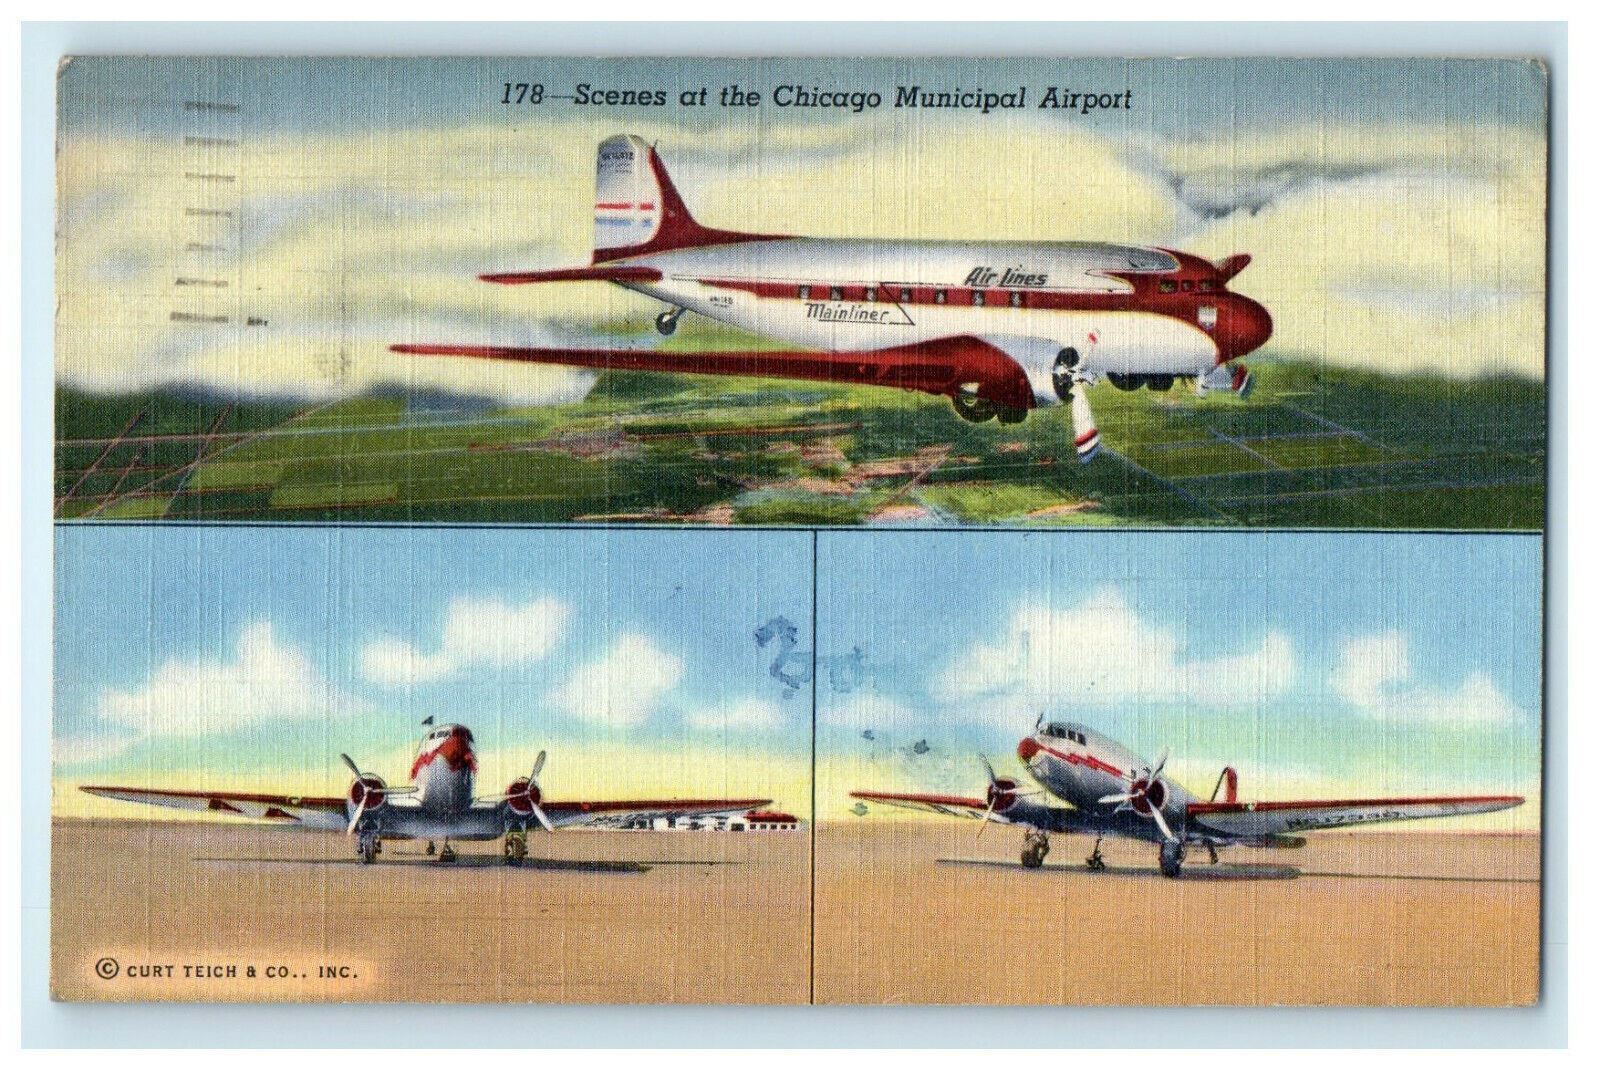 1943 Scenes at the Chicago Municipal Airport Posted Cancel Vintage Postcard